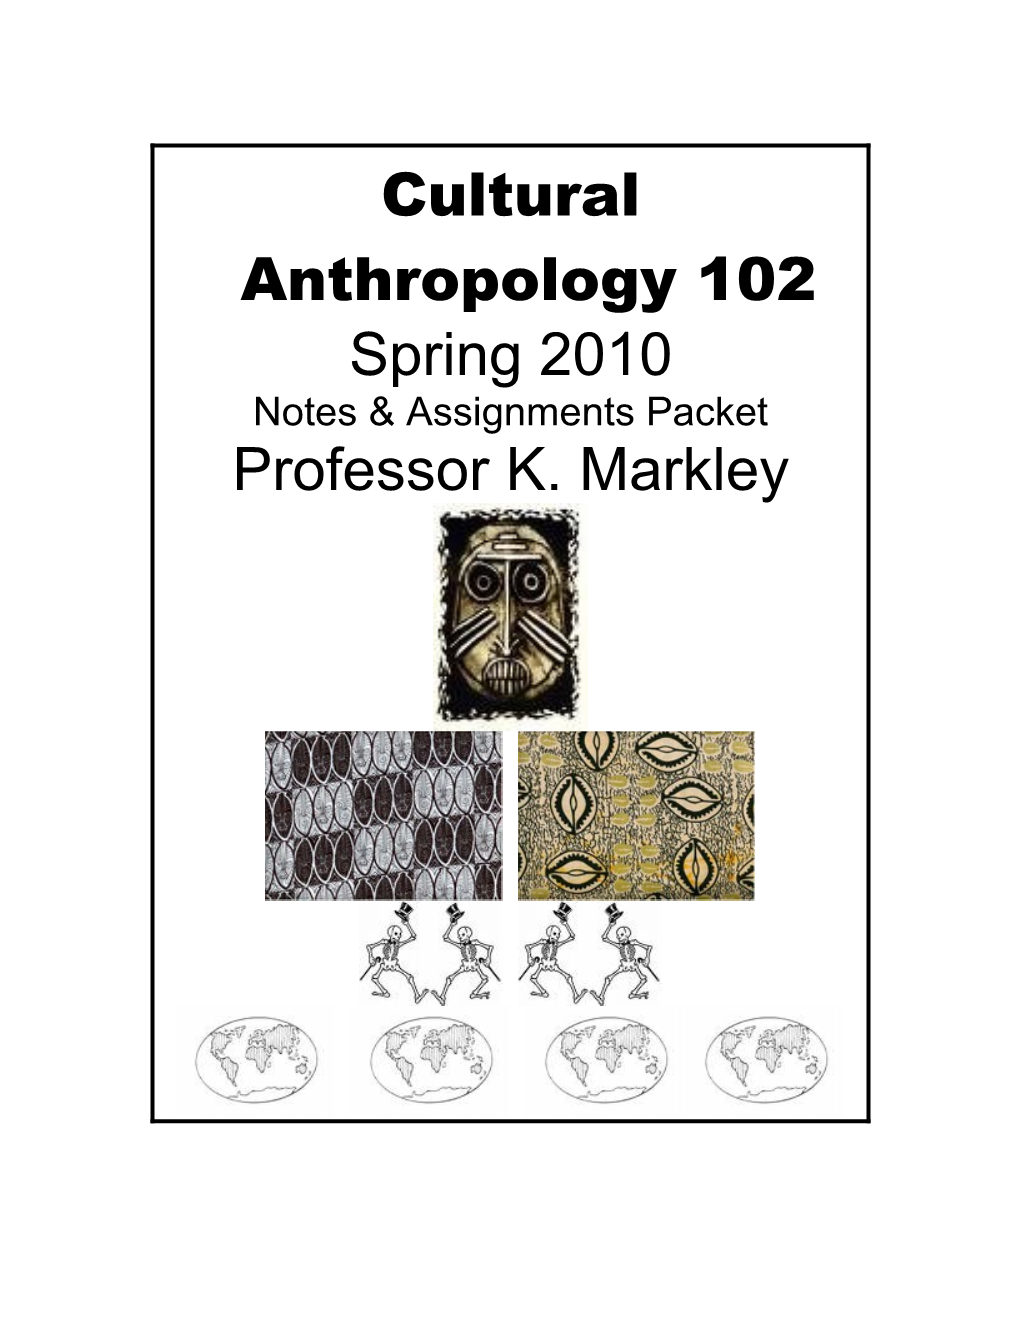 Cultural Anthropology 102